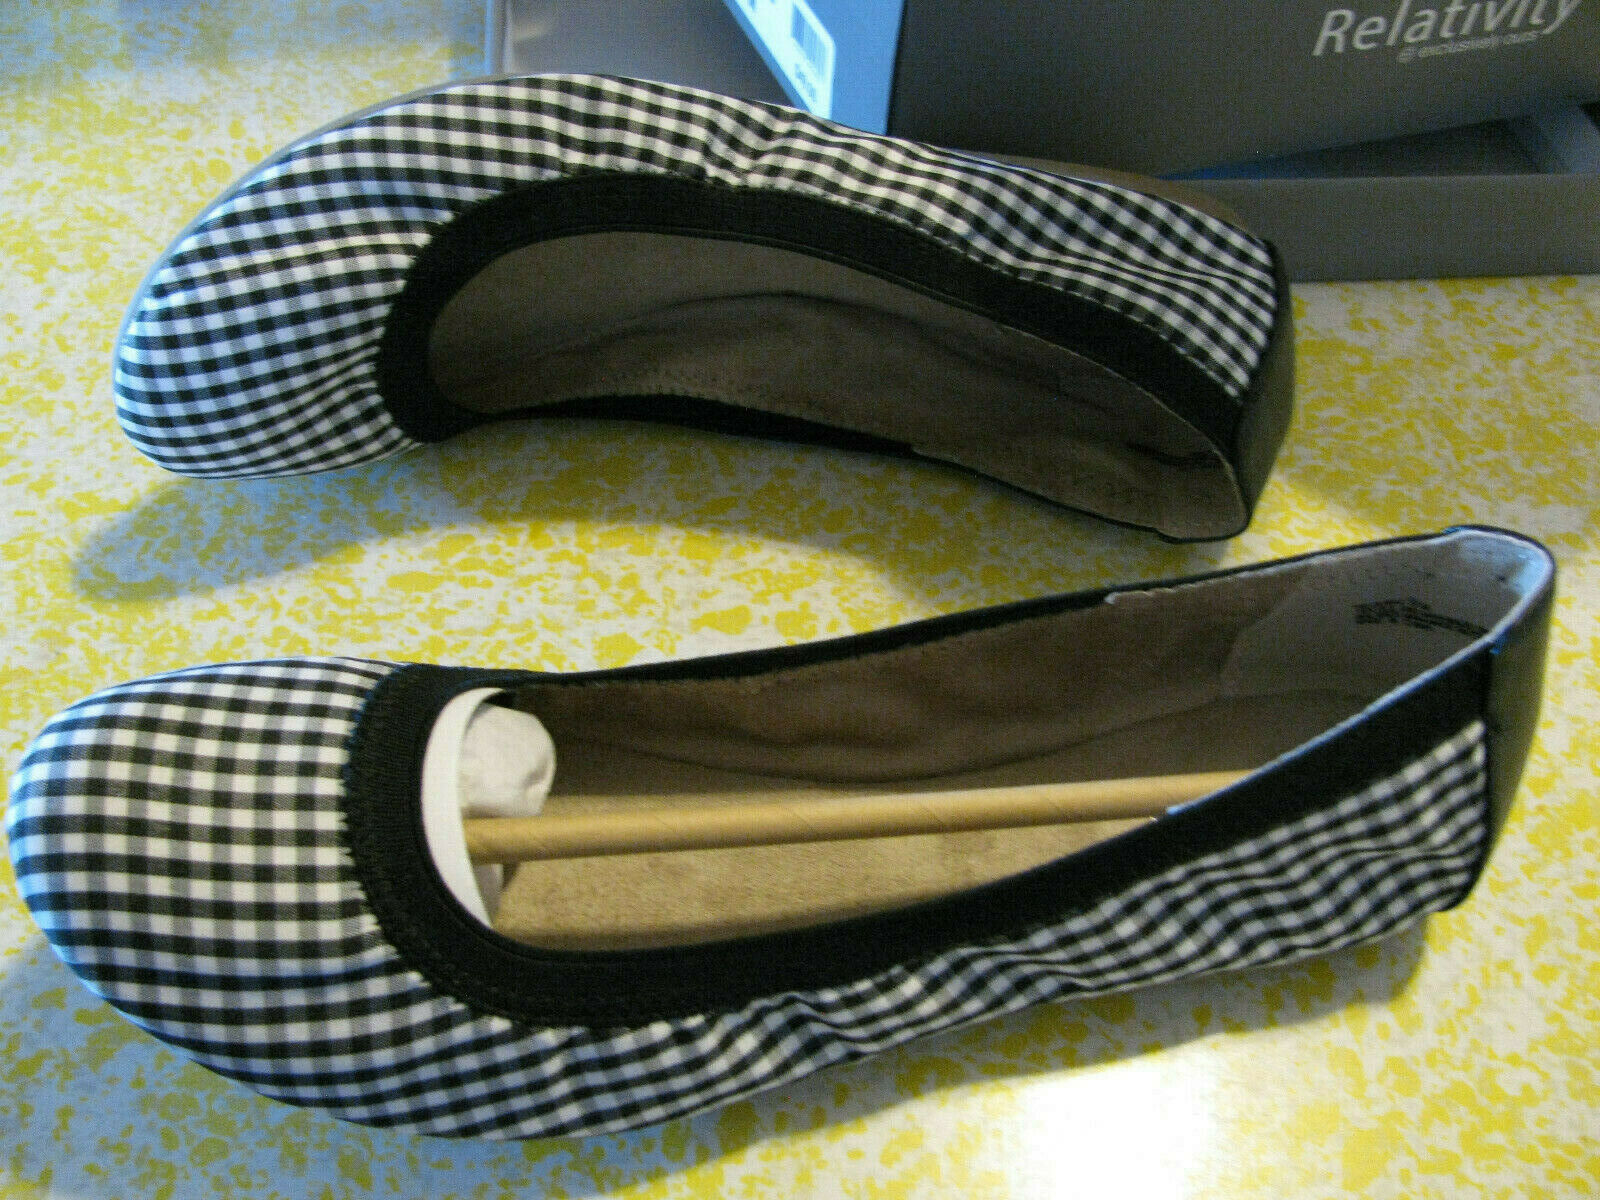 Relativity Womens 9M Blk/Wht Textile Checkered Slip On Flat Walking Shoes New